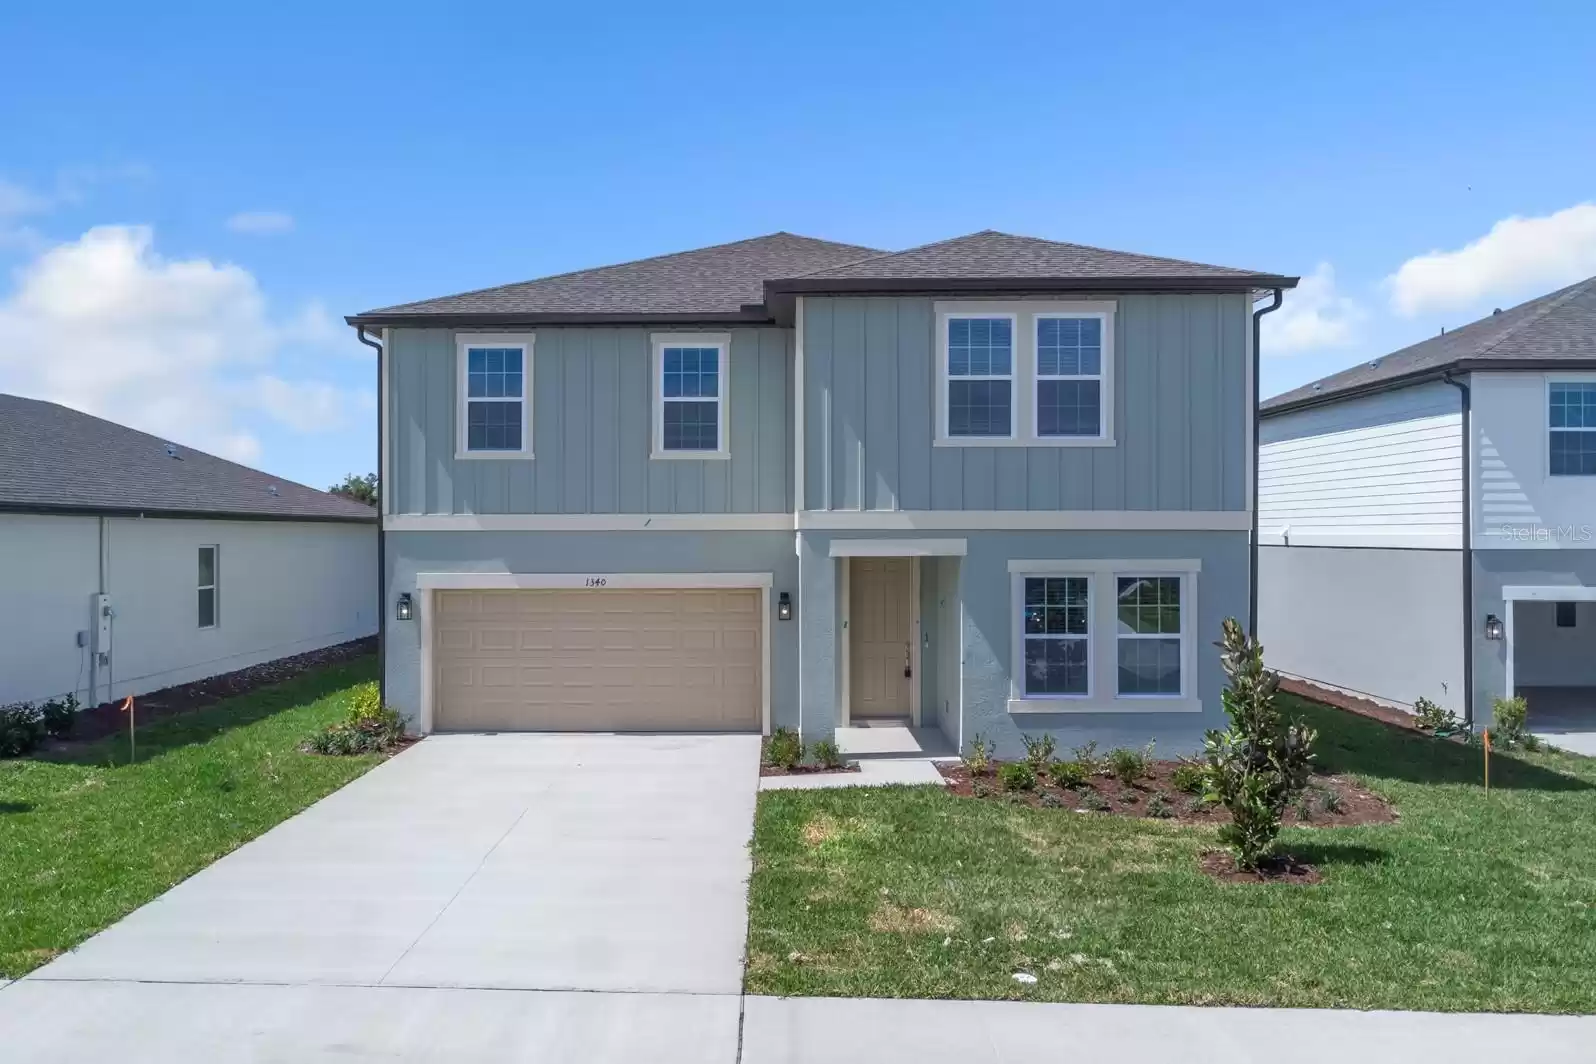 1340 STERLING POINTE DRIVE, DELTONA, Florida 32725, 5 Bedrooms Bedrooms, ,4 BathroomsBathrooms,Residential Lease,For Rent,STERLING POINTE,MFRO6184487